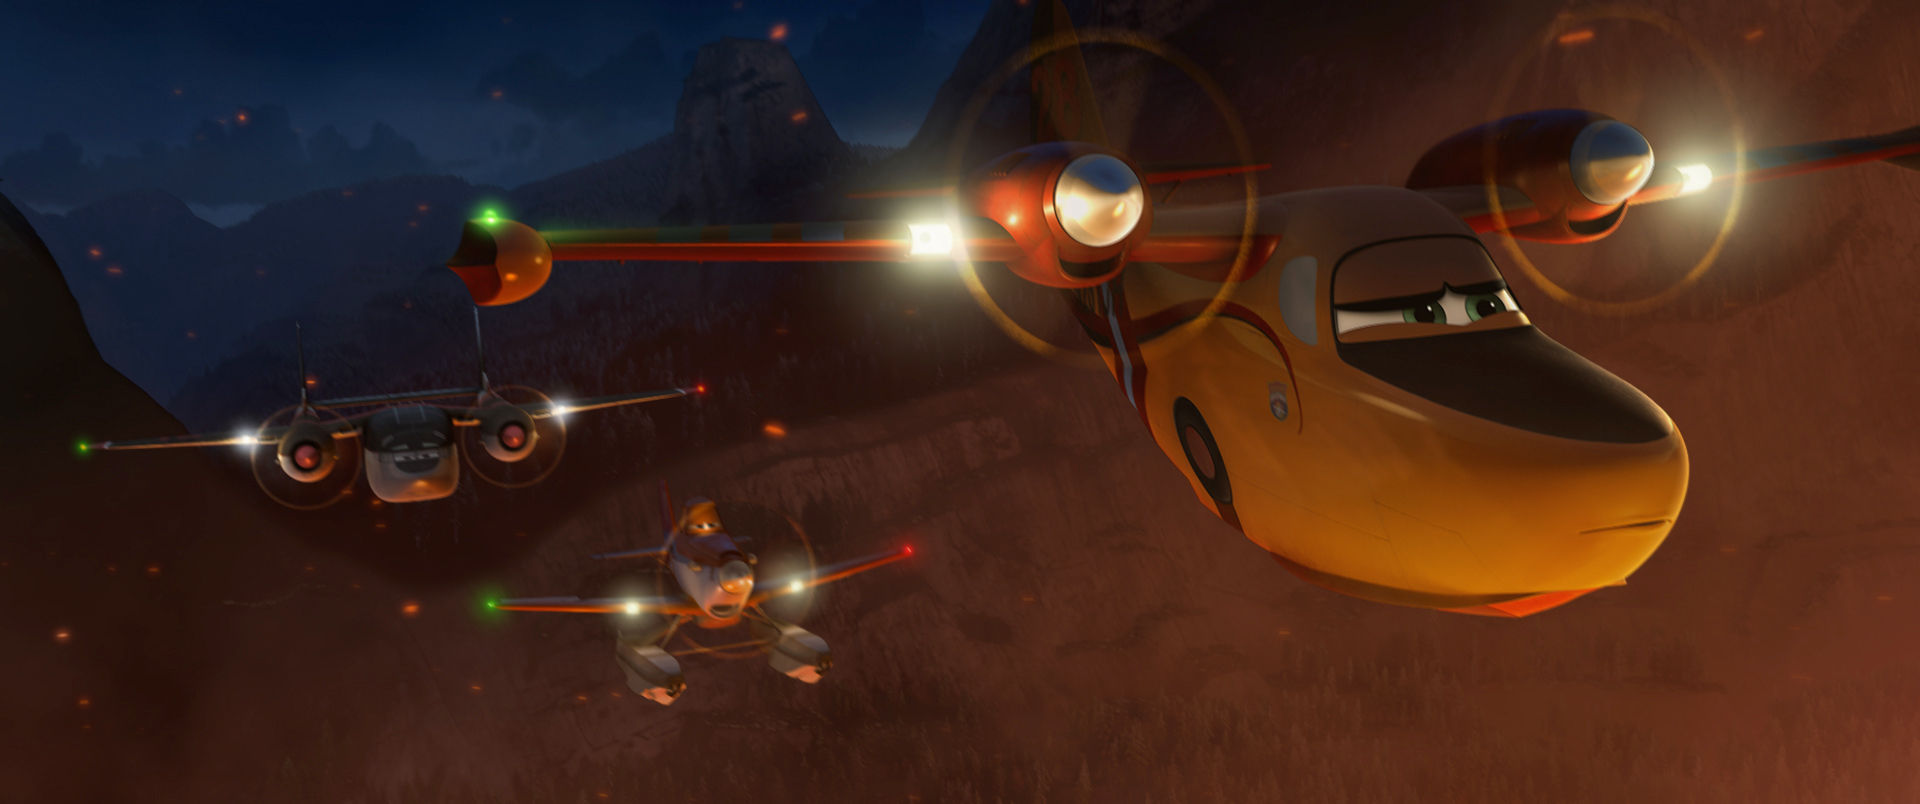 HQ Planes: Fire & Rescue Wallpapers | File 135.69Kb